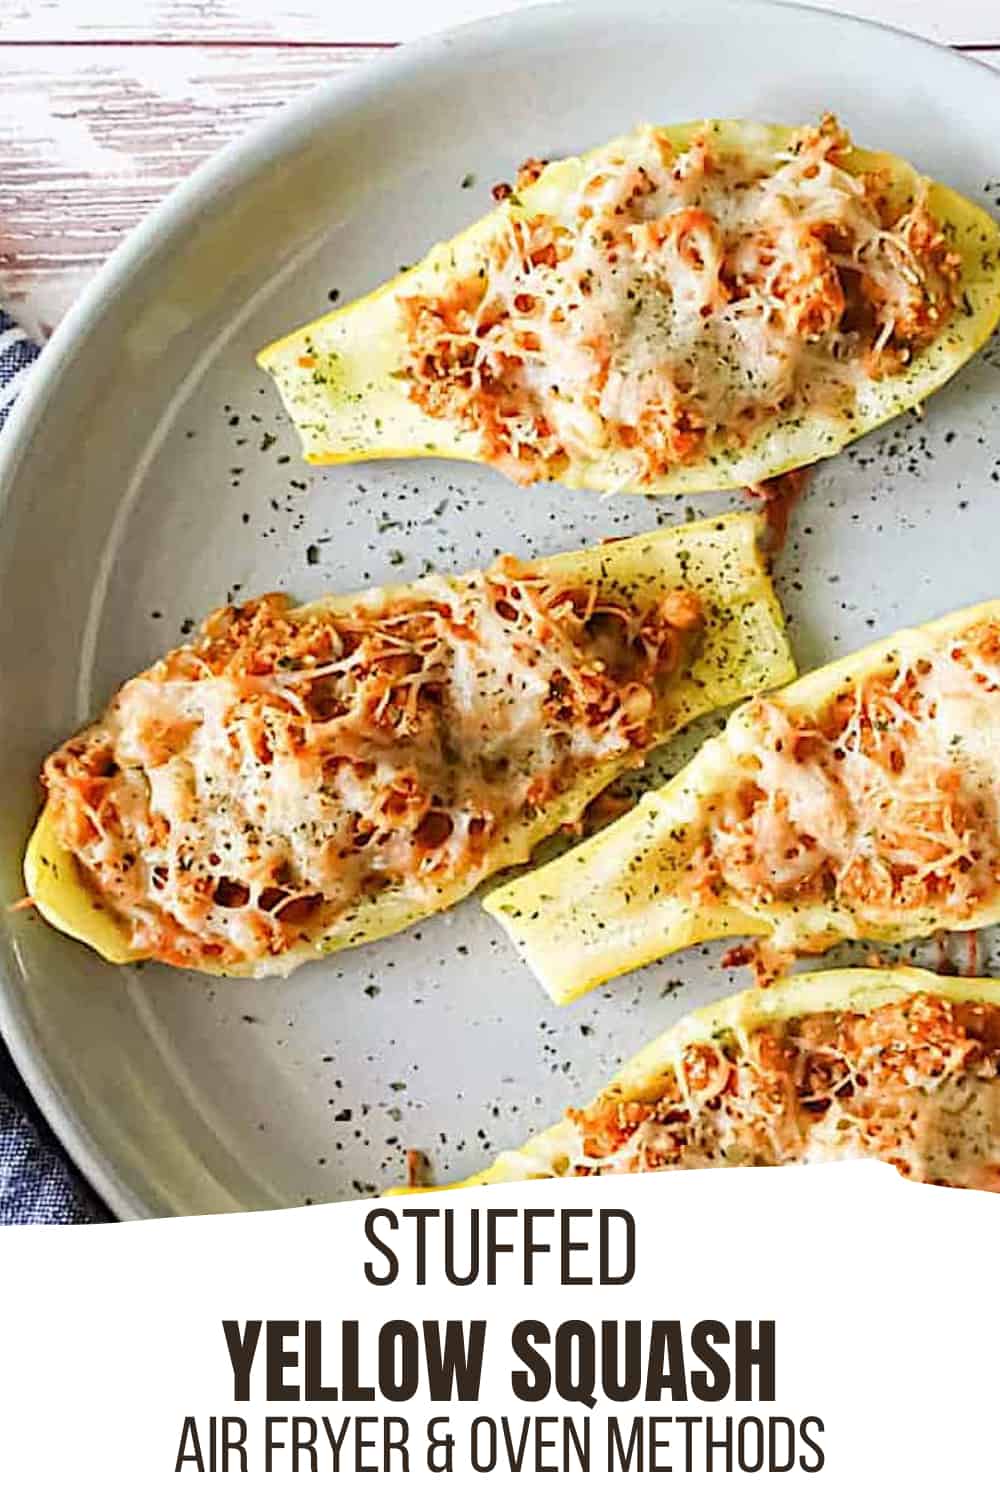 Stuffed Yellow Squash (Air Fryer or Oven)